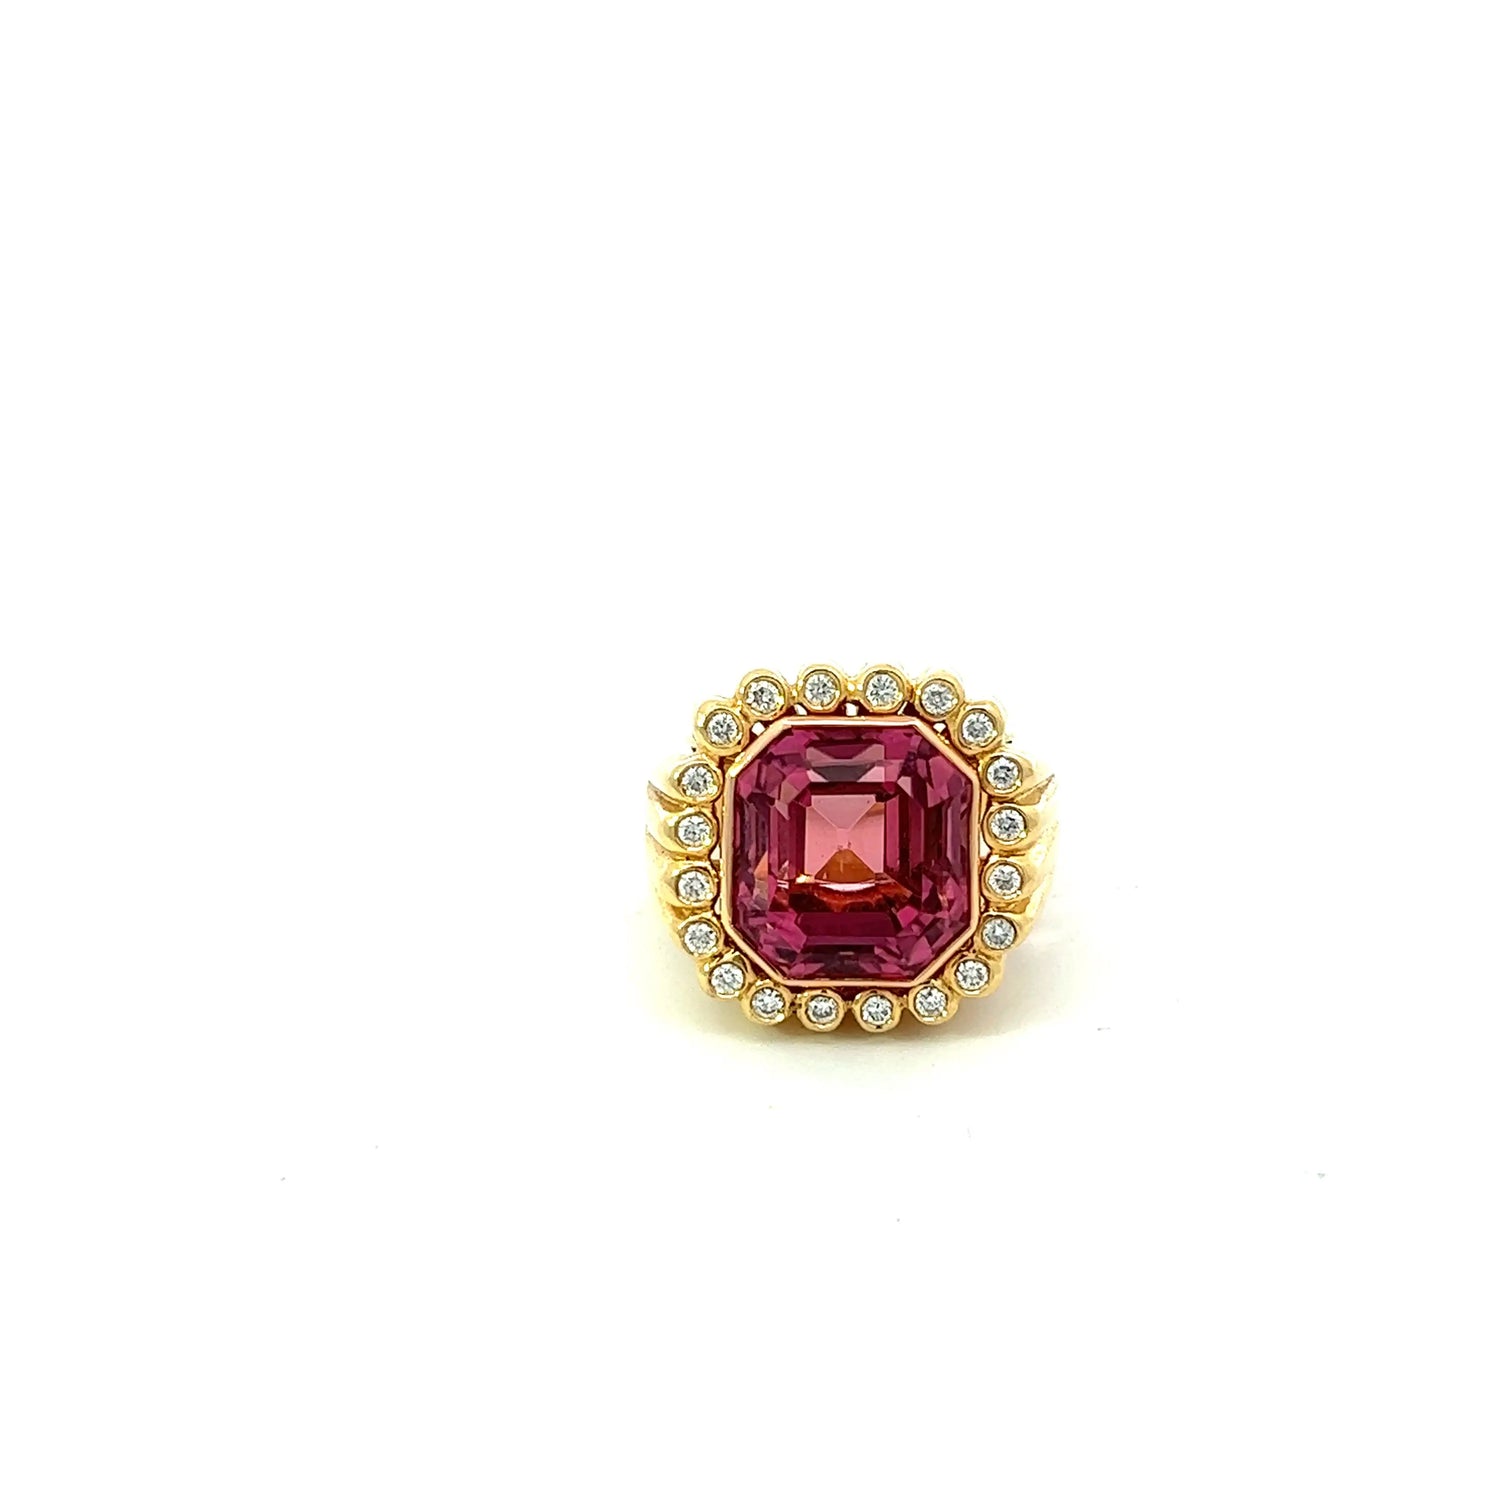 One of a kind pink tourmaline ring One of a kind pink tourmaline ring Vintage at the Squash Blossom Vintage at the Squash Blossom  Squash Blossom Vail